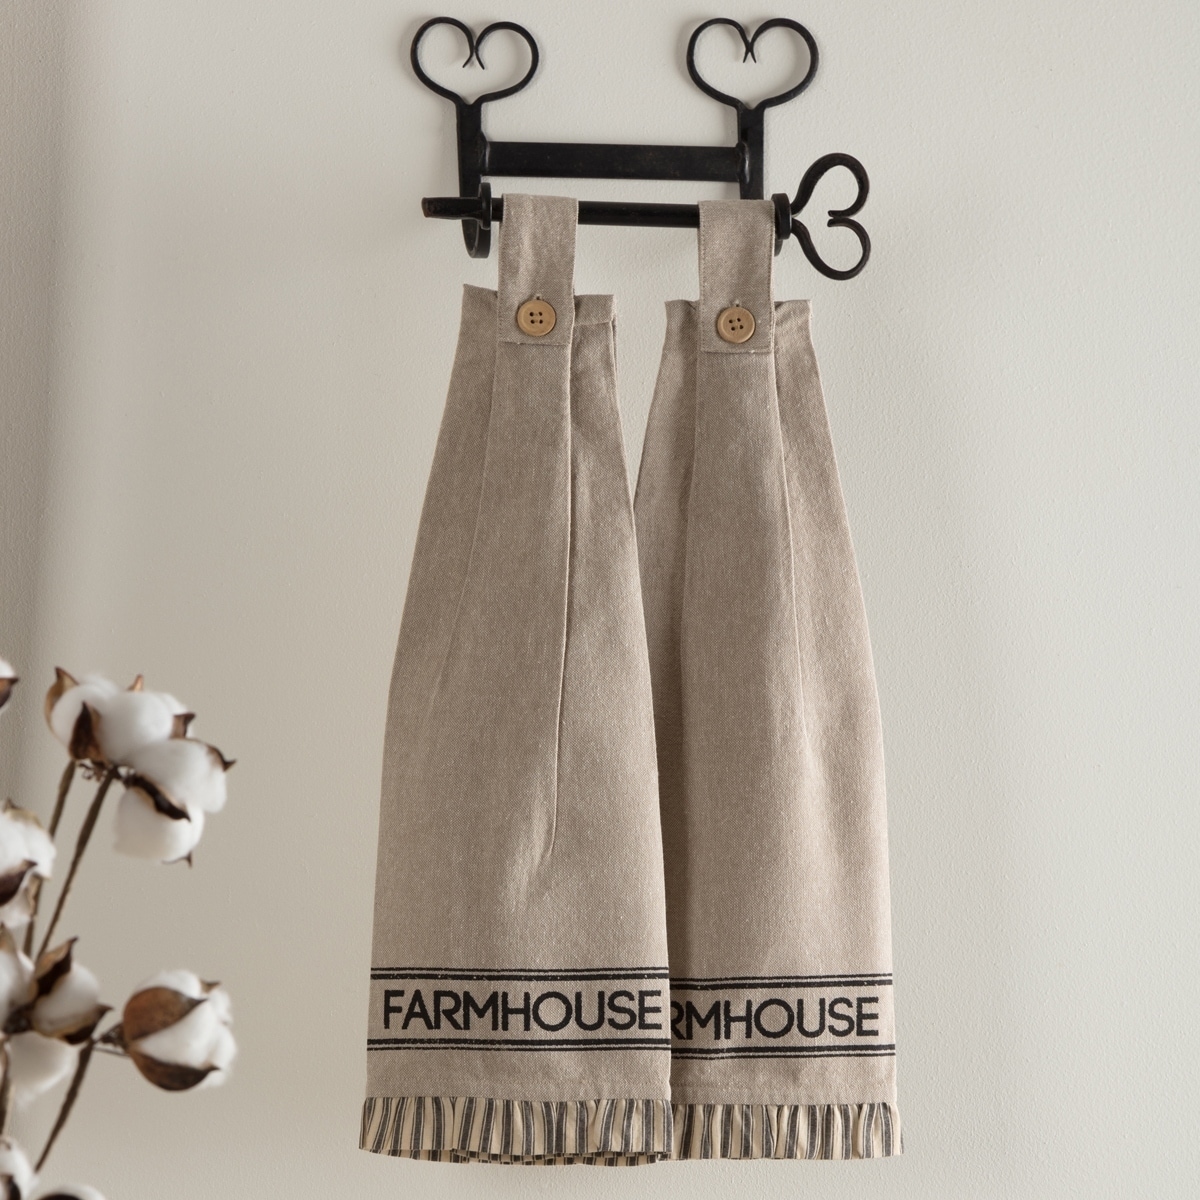 https://ak1.ostkcdn.com/images/products/23059566/Tan-Farmhouse-Tabletop-Kitchen-VHC-Sawyer-Mill-Kitchen-Towel-Set-of-2-Fabric-Loop-Cotton-Text-Stenciled-Chambray-5081d049-c5dc-4ec0-8822-40af616ee3ab.jpg